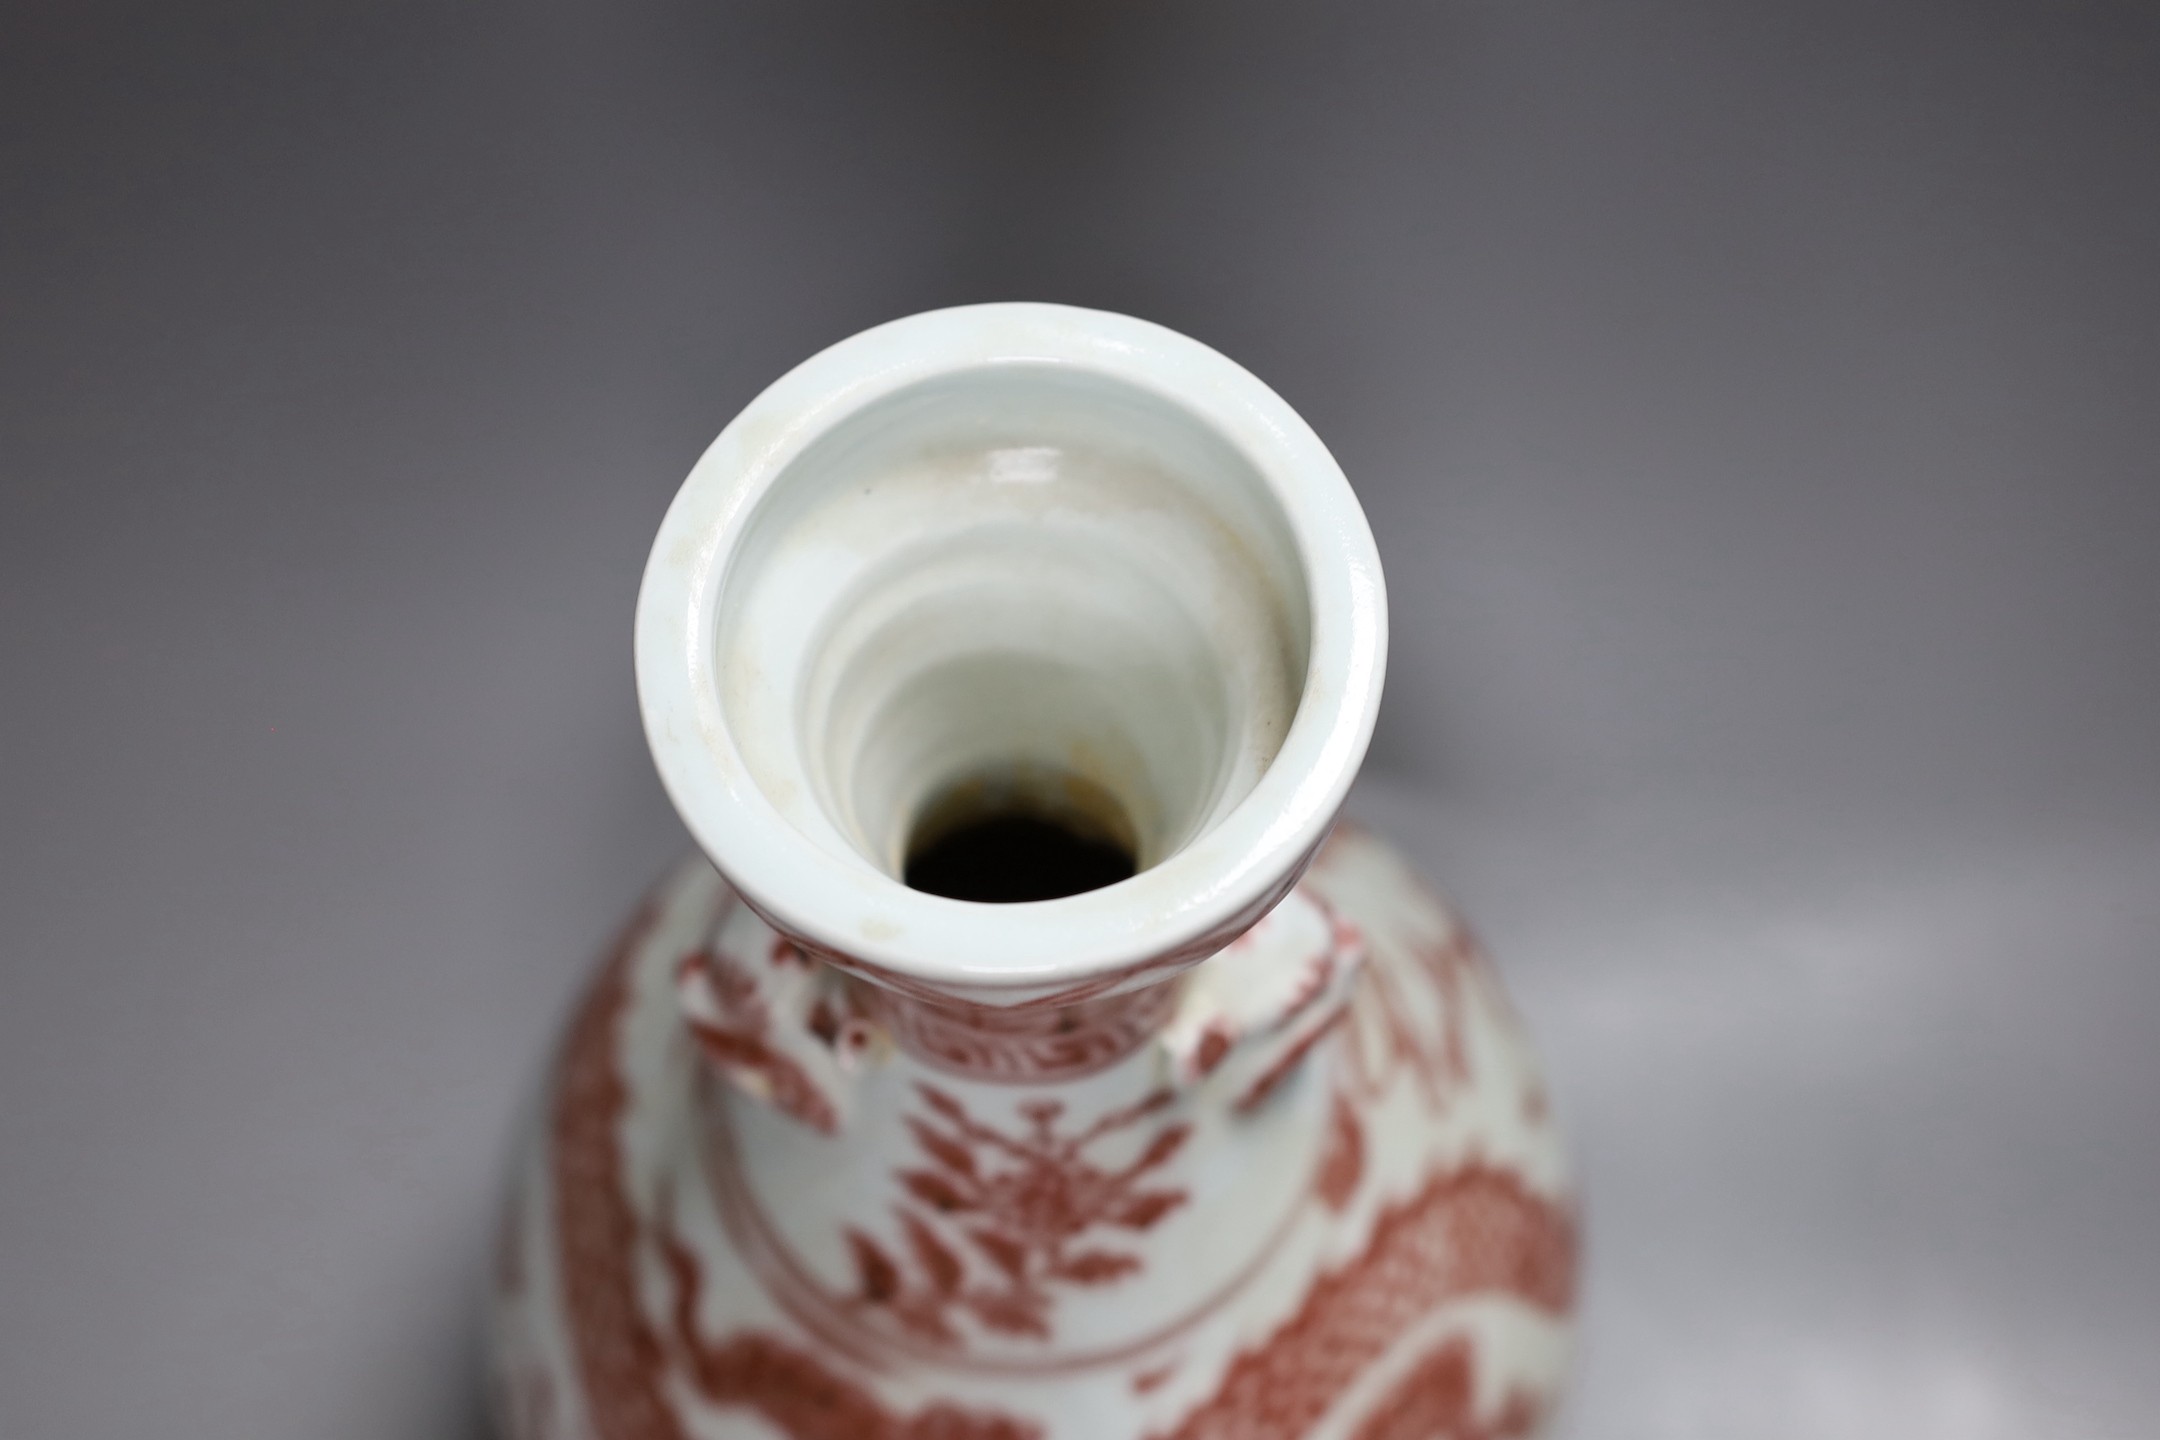 A Chinese vase with dragon decoration in underglaze copper, 35cm